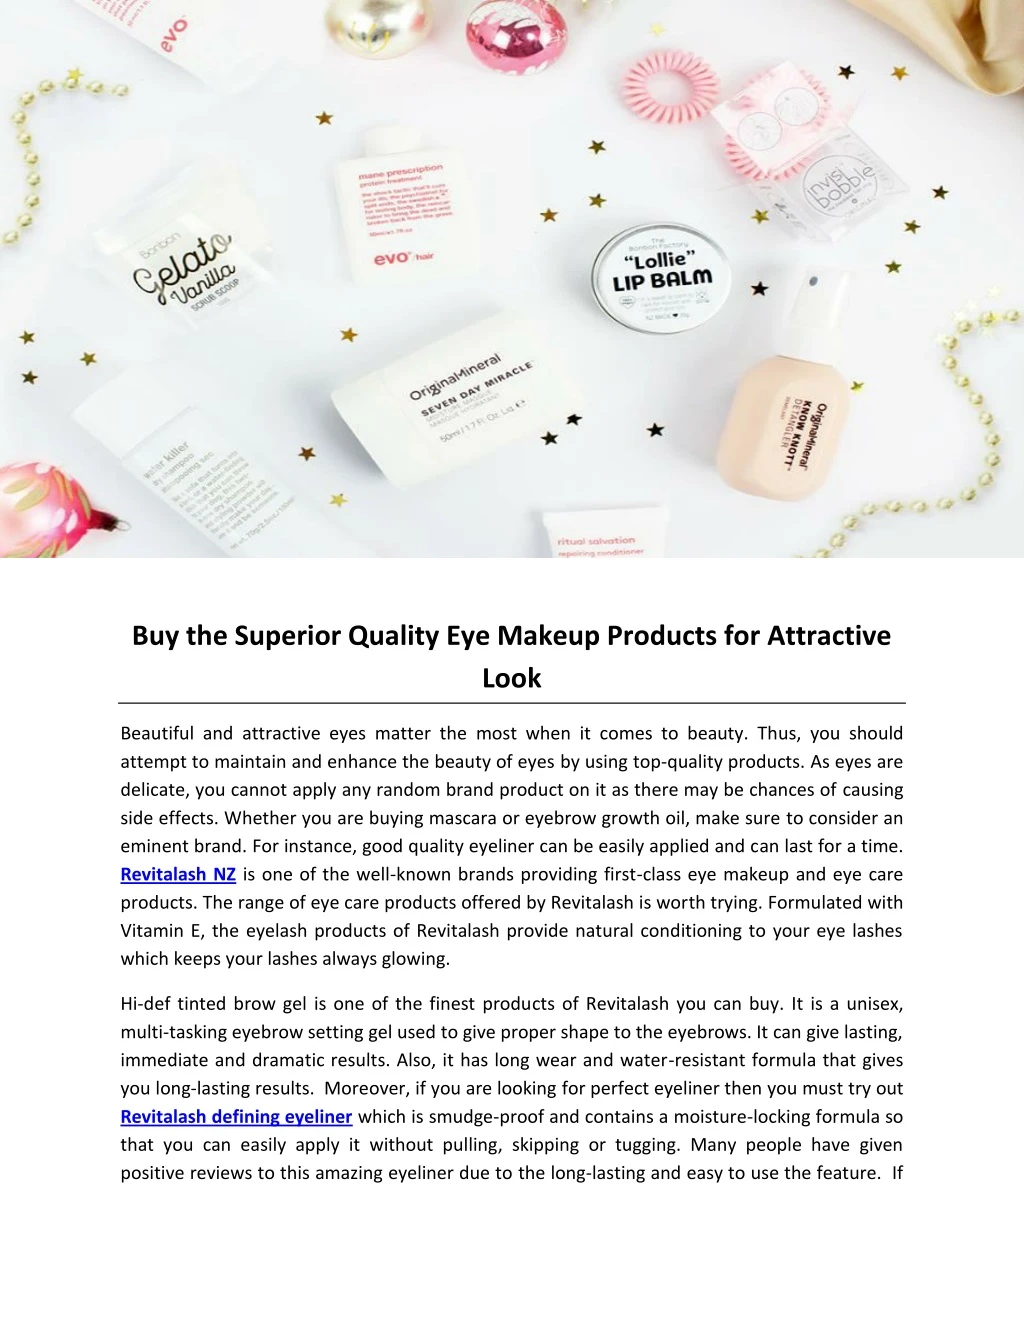 buy the superior quality eye makeup products